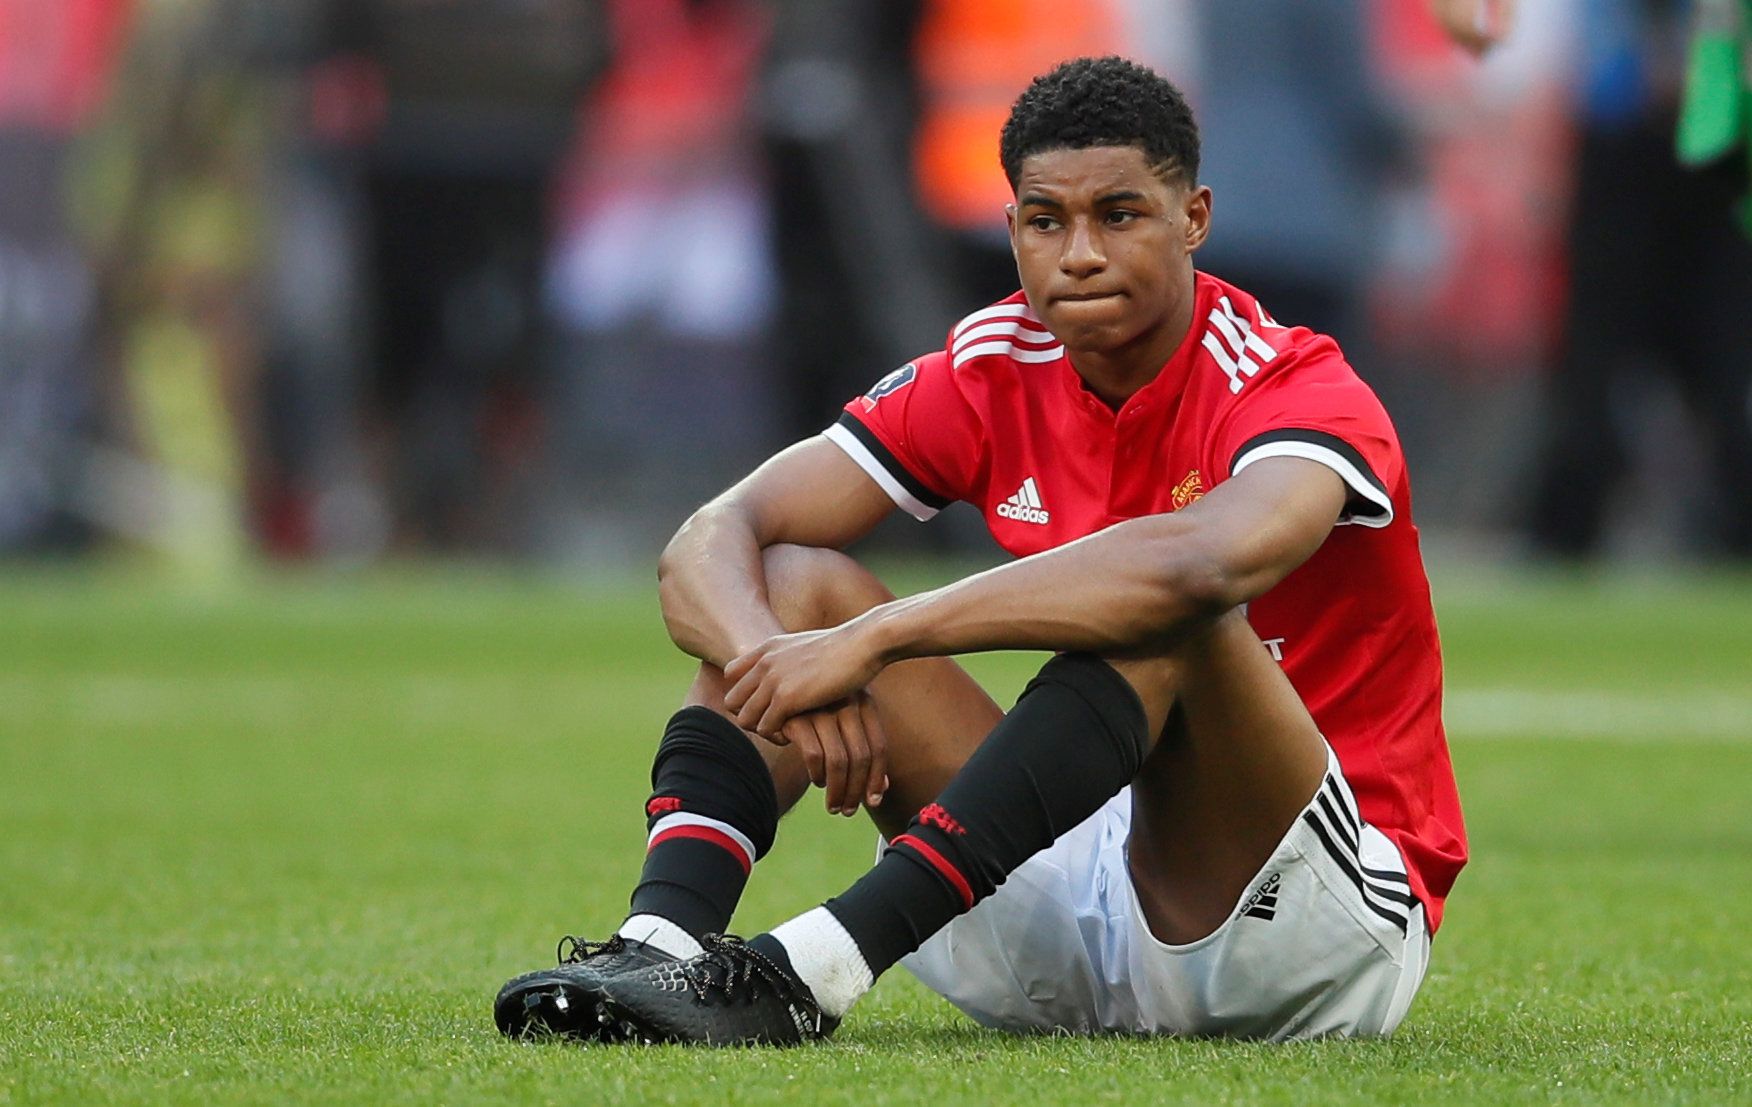 Soccer Football - FA Cup Final - Chelsea vs Manchester United - Wembley Stadium, London, Britain - May 19, 2018   Manchester United's Marcus Rashford looks dejected after the match    REUTERS/David Klein